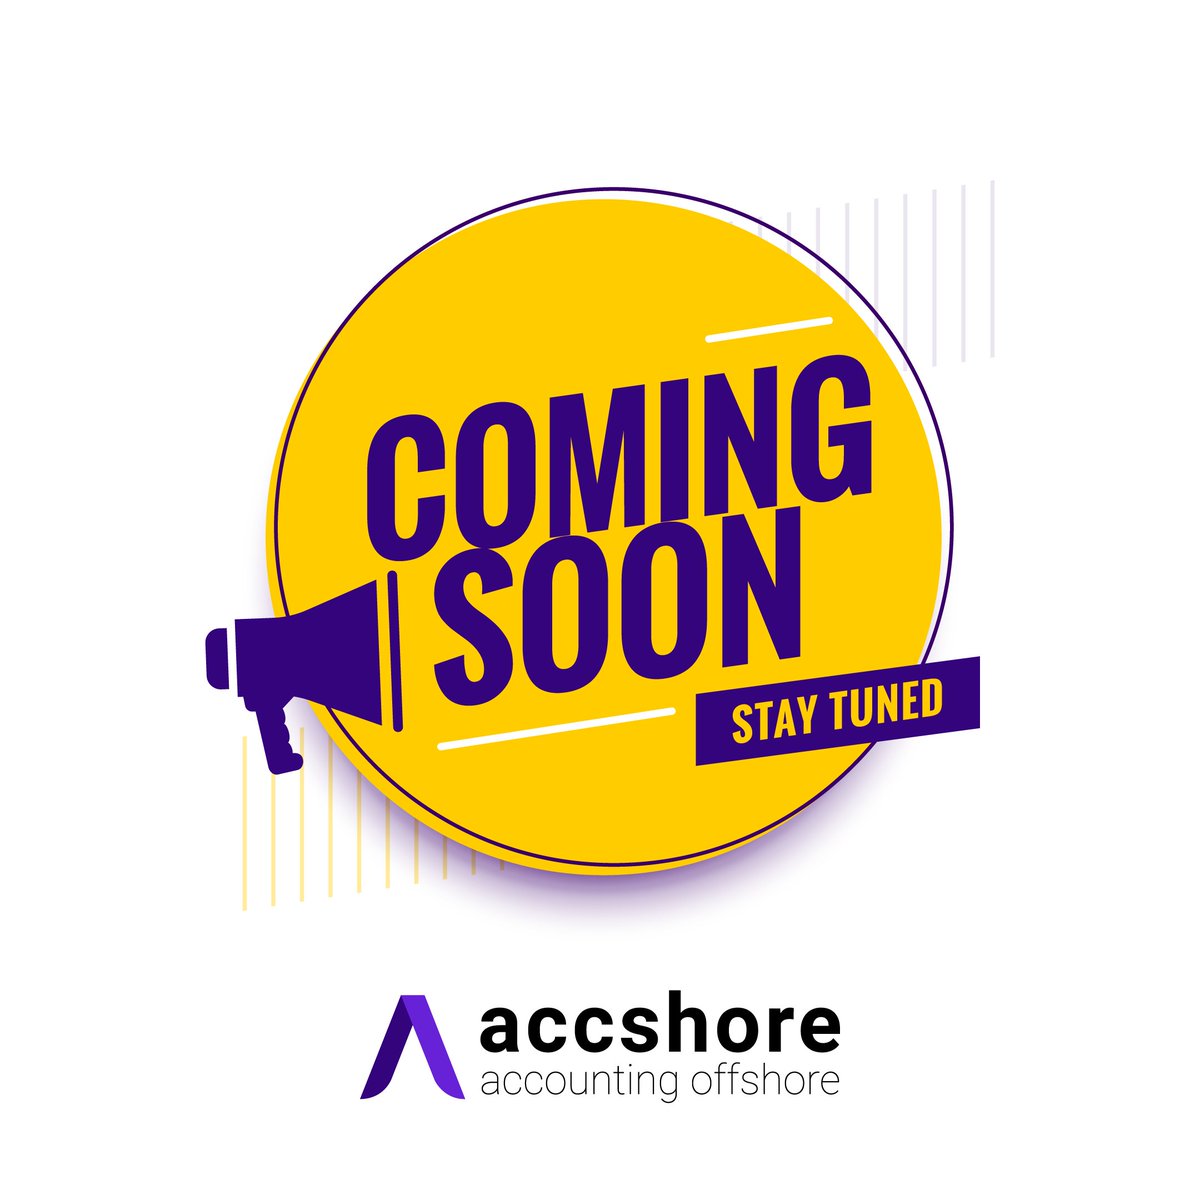 Unleash your potential with Accshore launch - It's time to take things to the next level.

#AccshoreLaunch #BusinessOpportunities #ProfessionalGrowth #entrepreneurialjourney #futuresuccess #offshoreservices #accountingservices #FinancialAdvisory